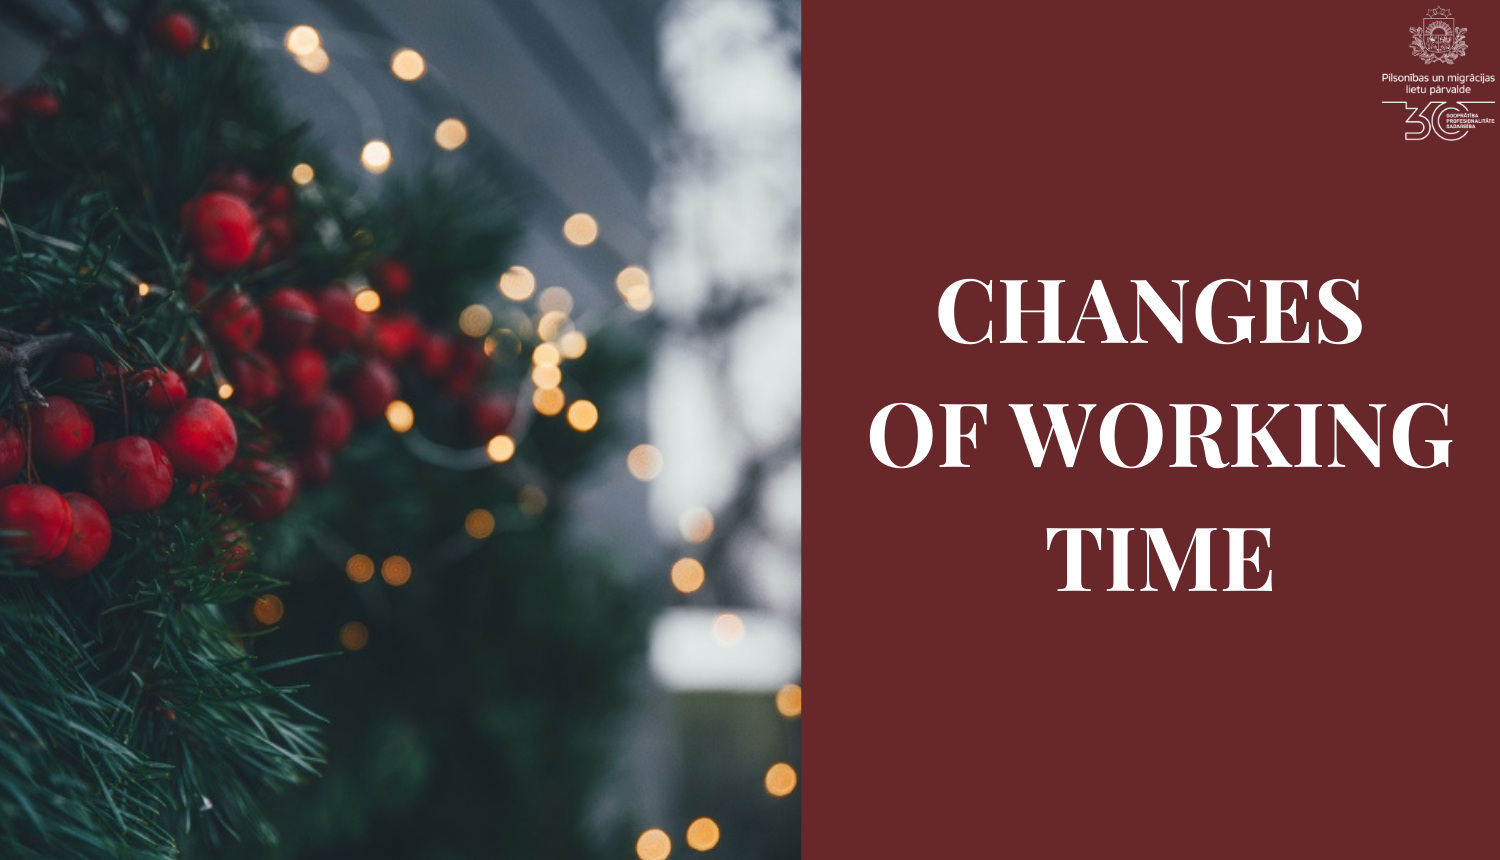 Changes of working time